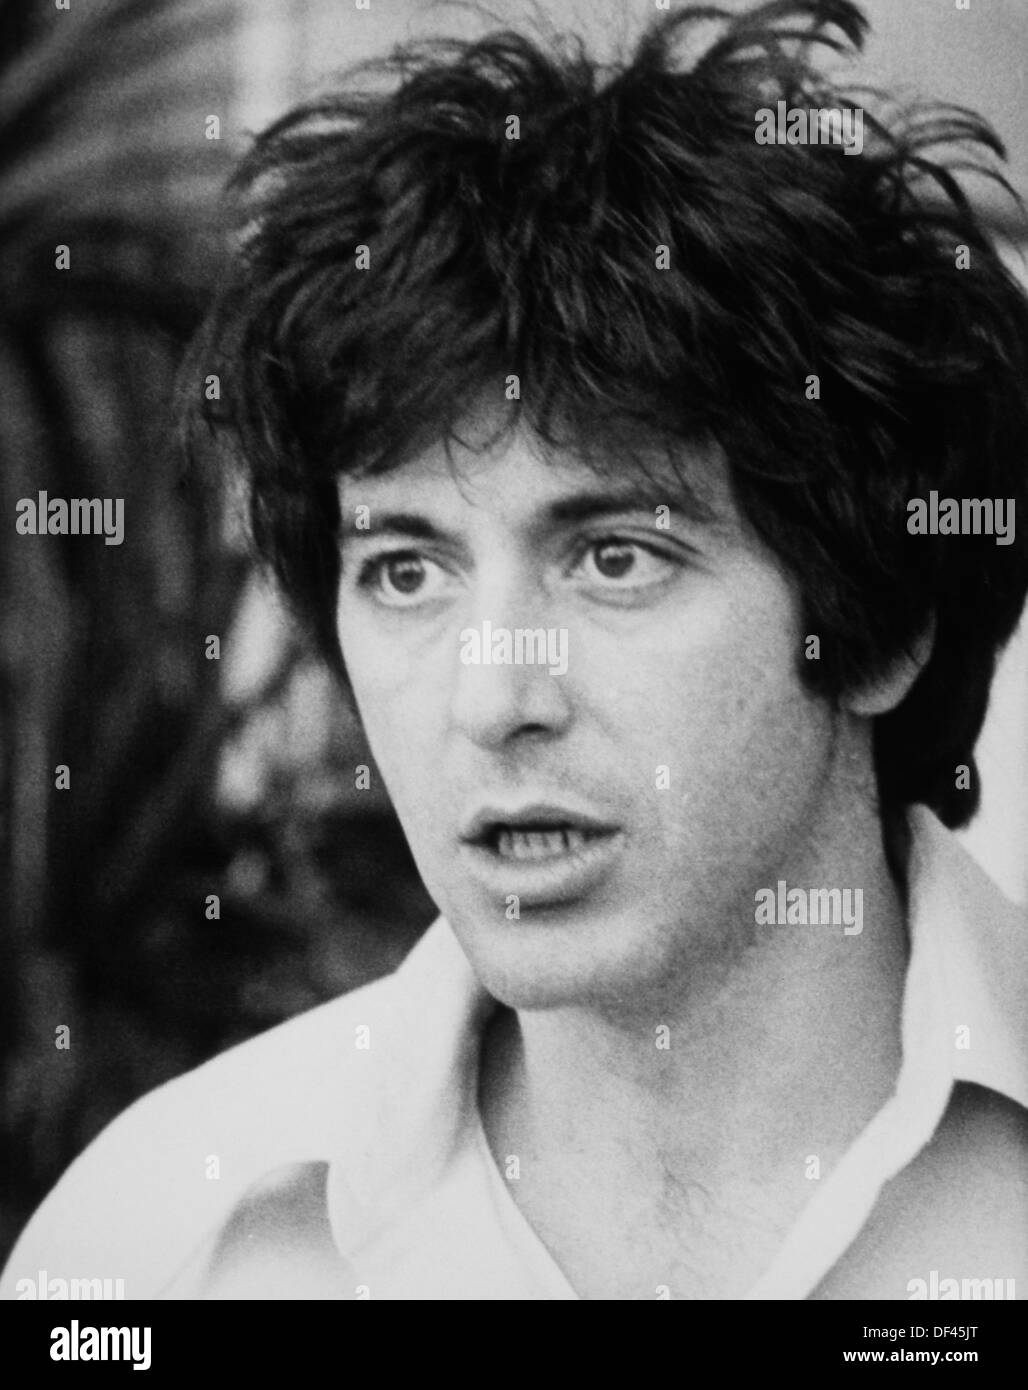 Al Pacino, Portrait, on-set of the Film, 'Dog Day Afternoon', Artists Entertainment Complex, Warner Bros., 1975 Stock Photo